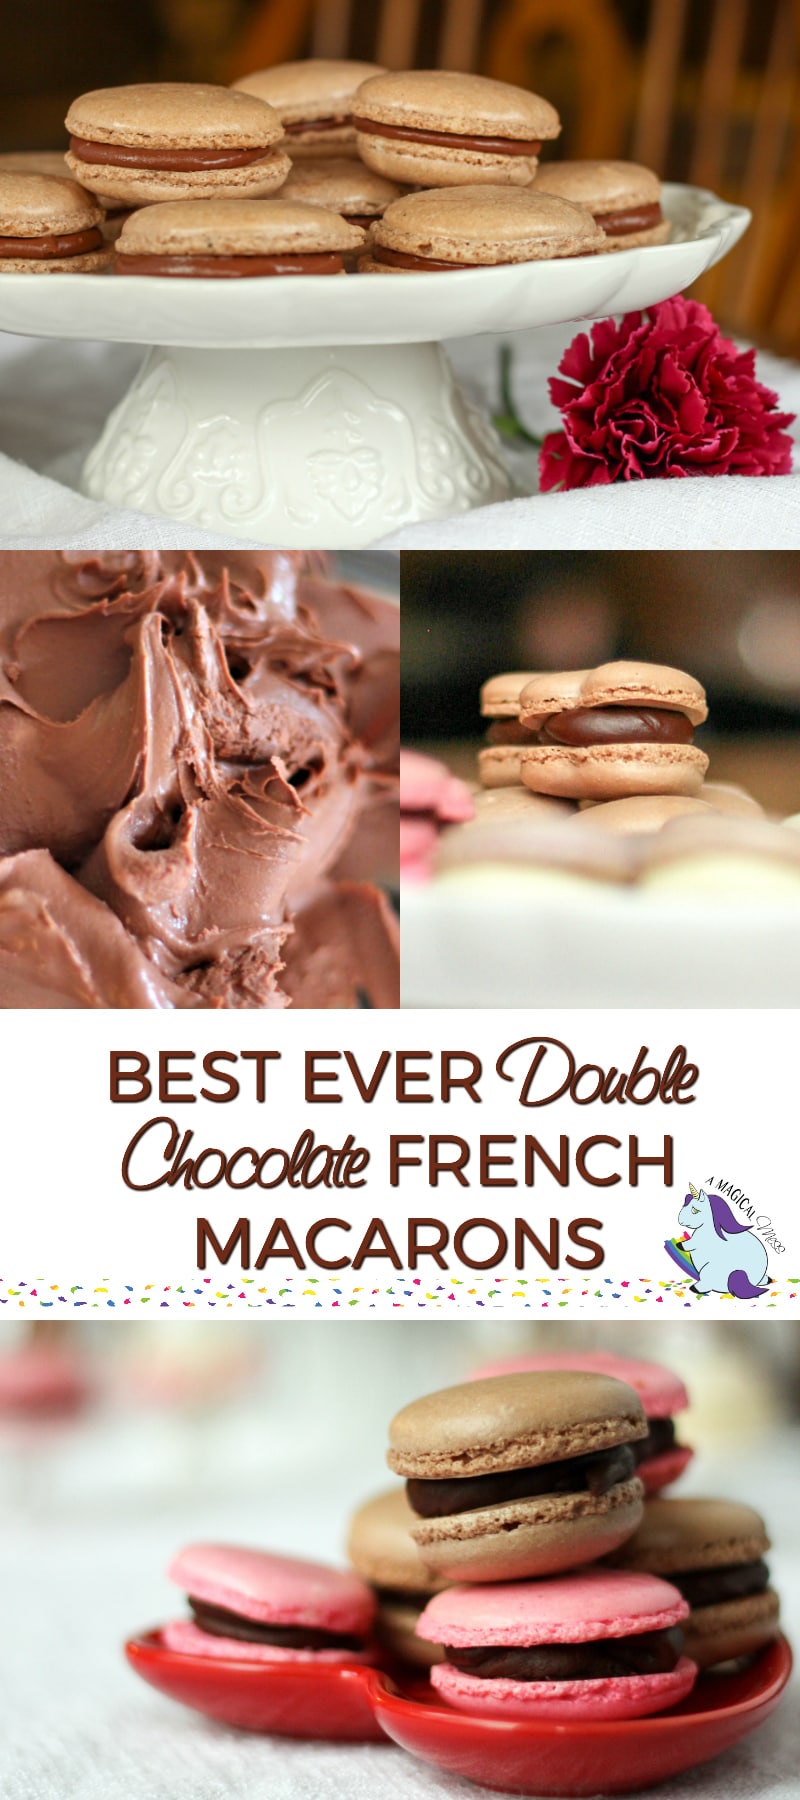 Collage of double chocolate macarons and chocolate ganache.